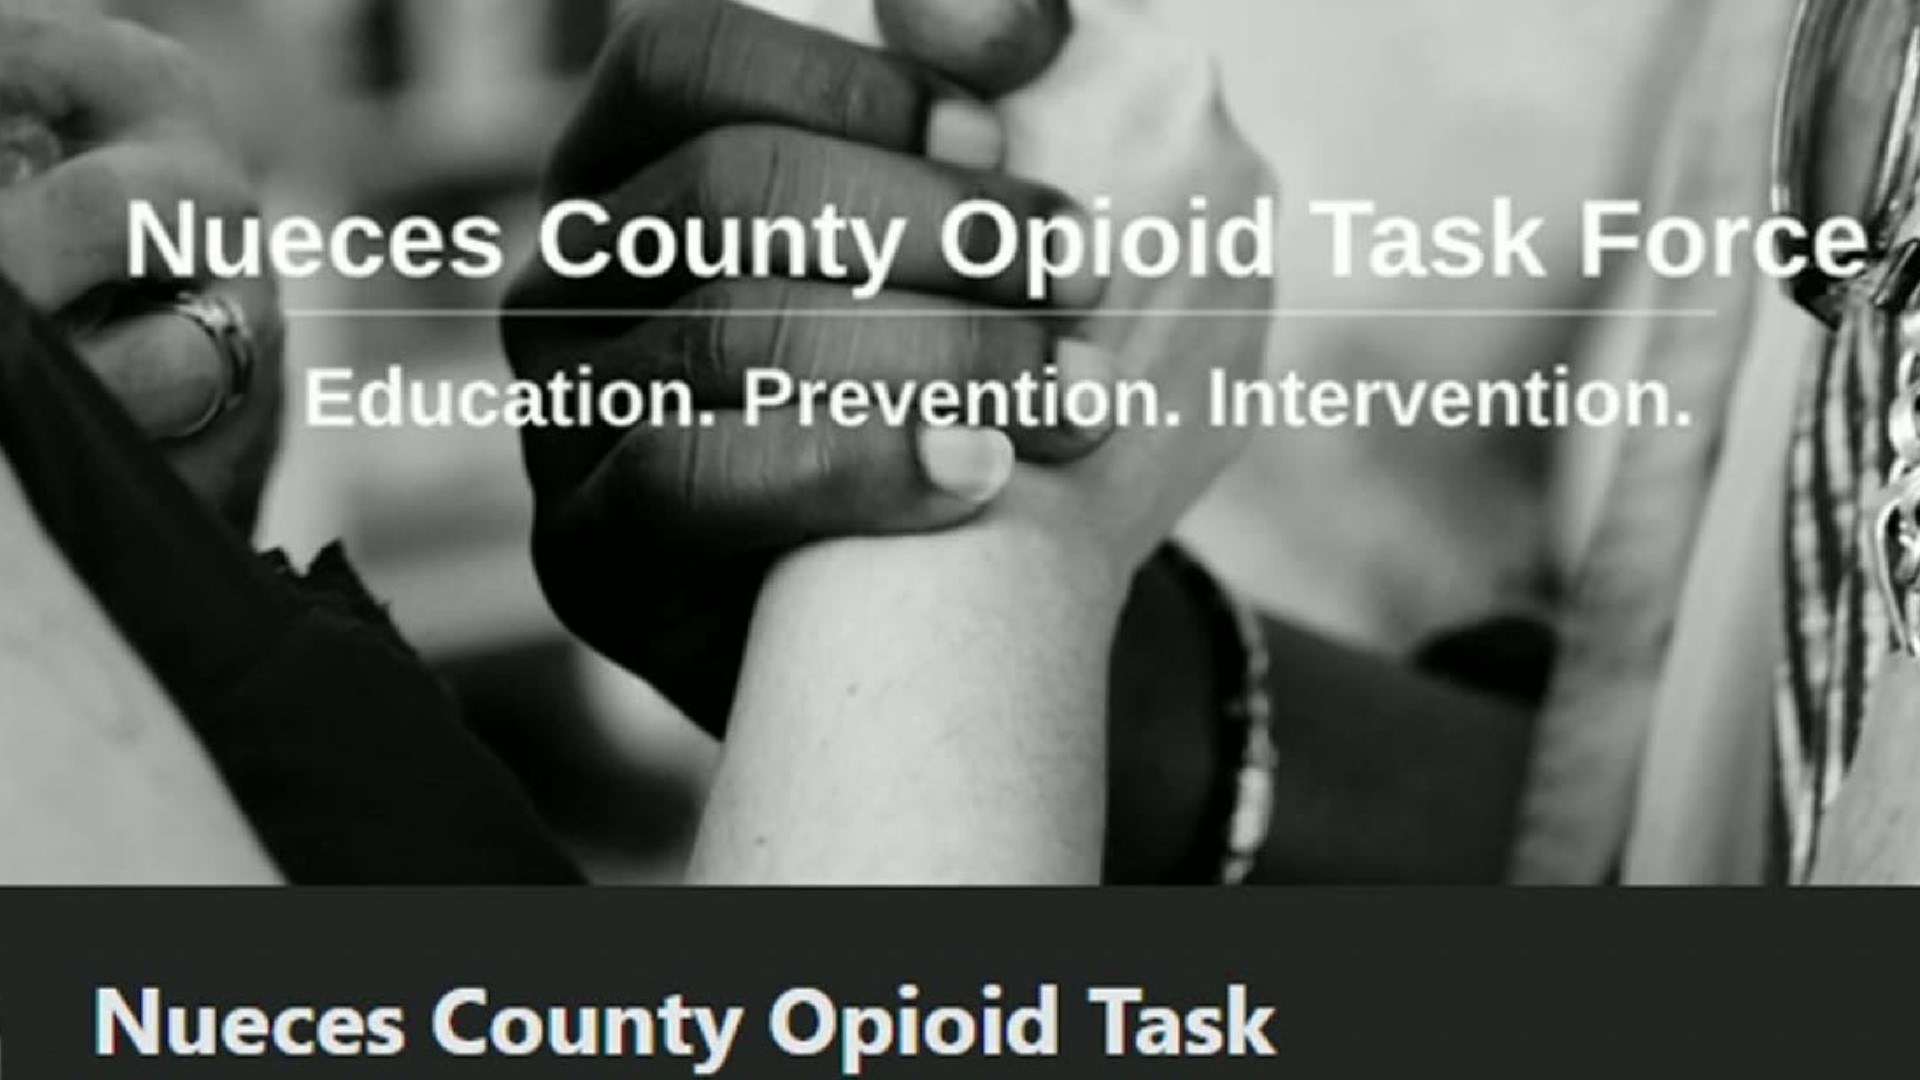 Join the voice of recovery as the Nueces County Opioid Task Force is hard at work to stop the crisis.